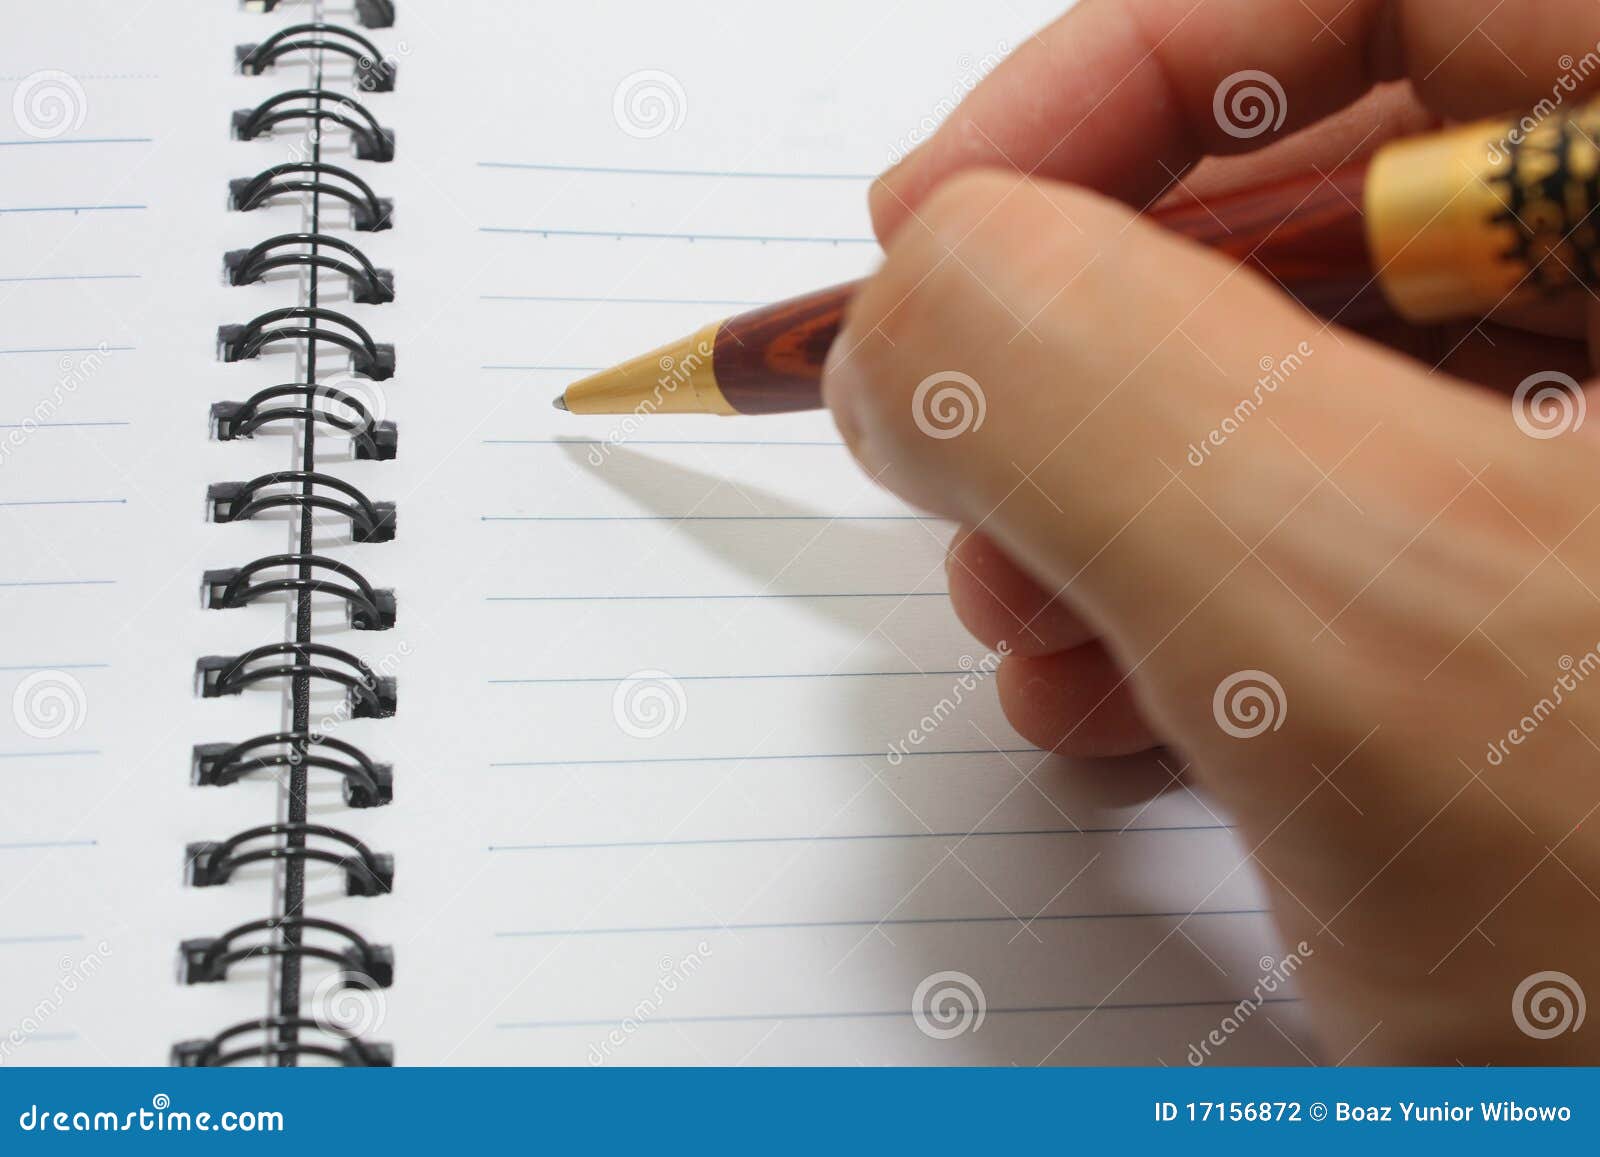 hand writing on notebook